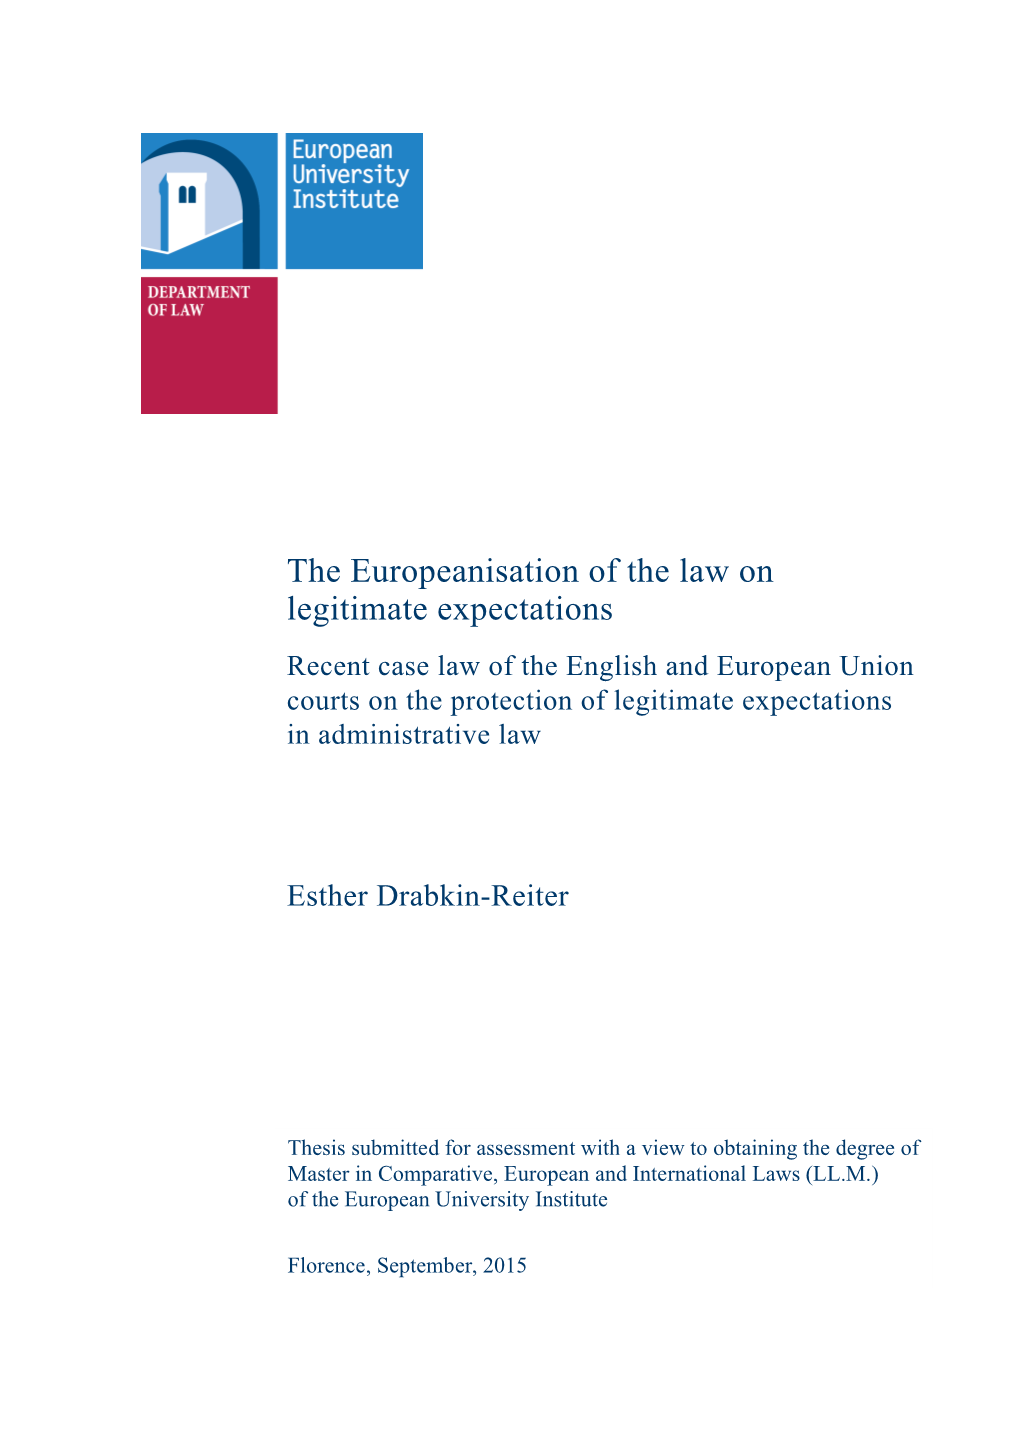 The Europeanisation of the Law on Legitimate Expectations